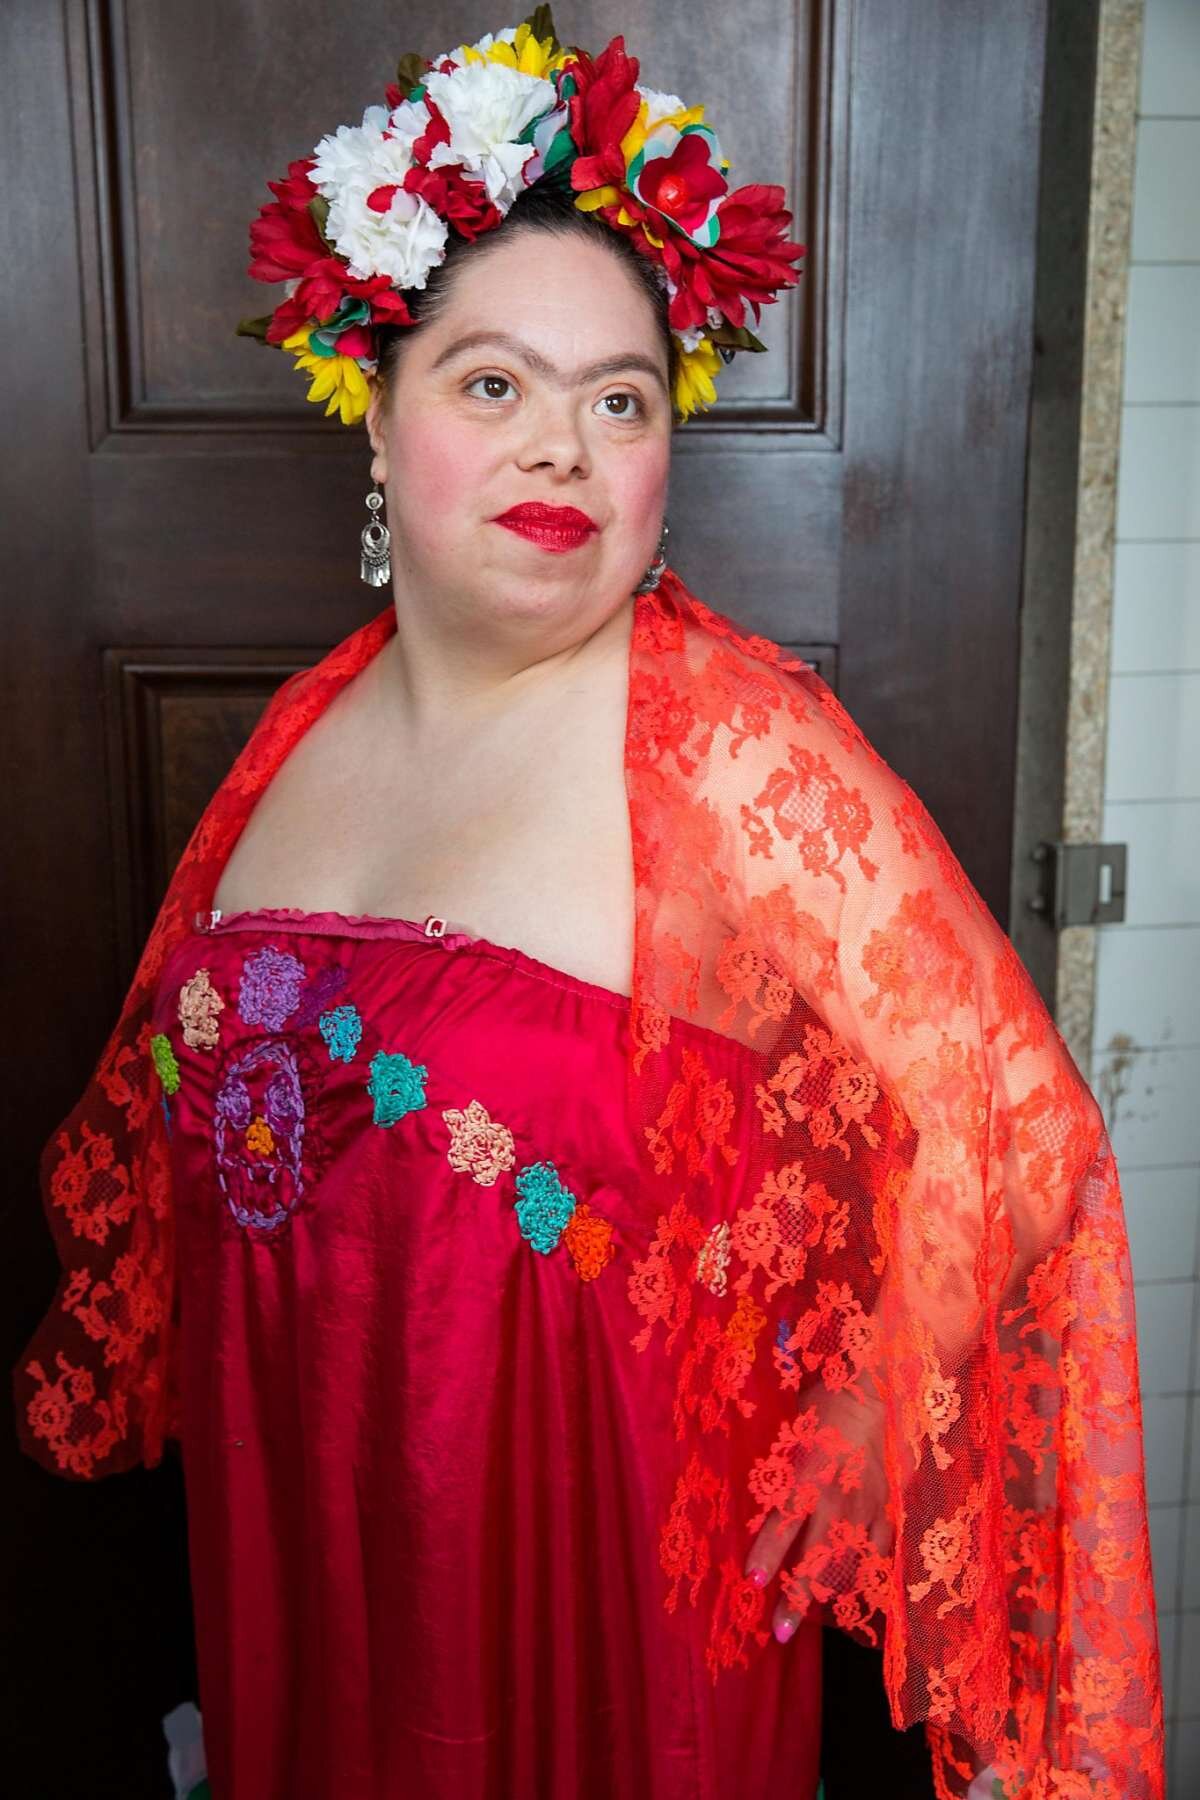 Elizabeth Rangel poses for a portrait wearing her own creation during the 2018 Creative Growth’s Beyond Trend runway show at the Scottish Rite Center in Oakland.